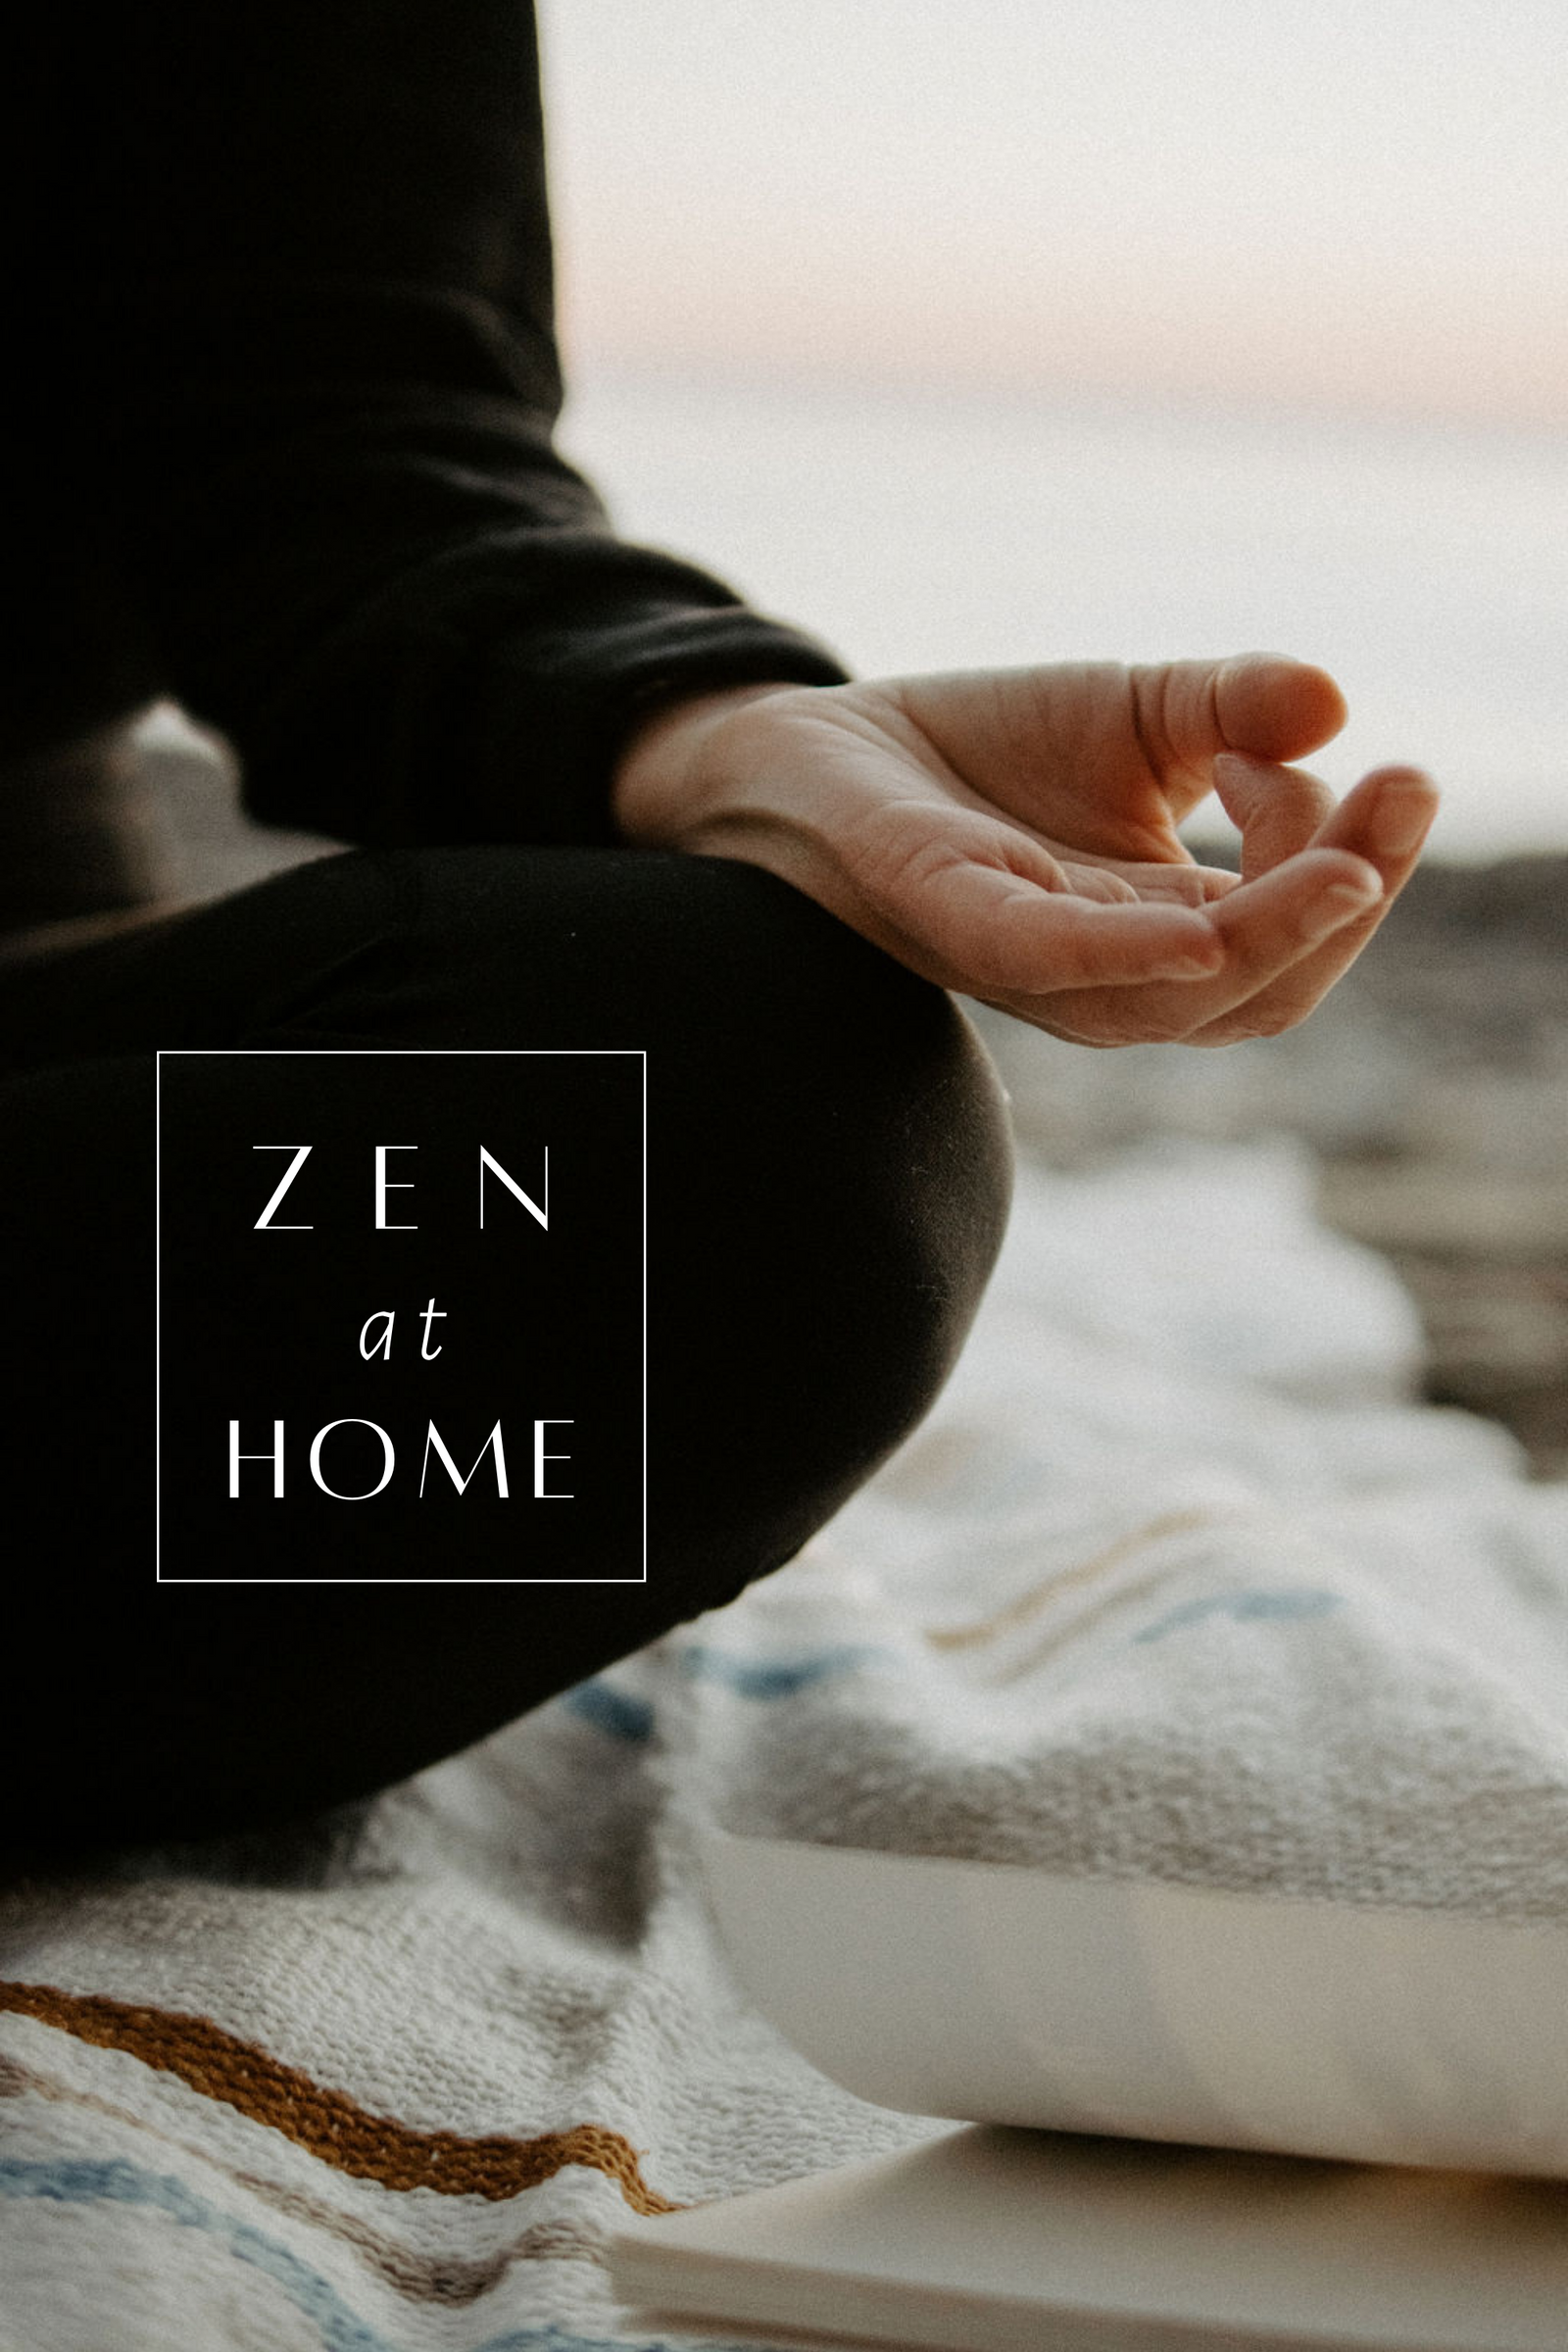 Zen at Home  Tips for Wellness in 2021 - Lake Effect Co